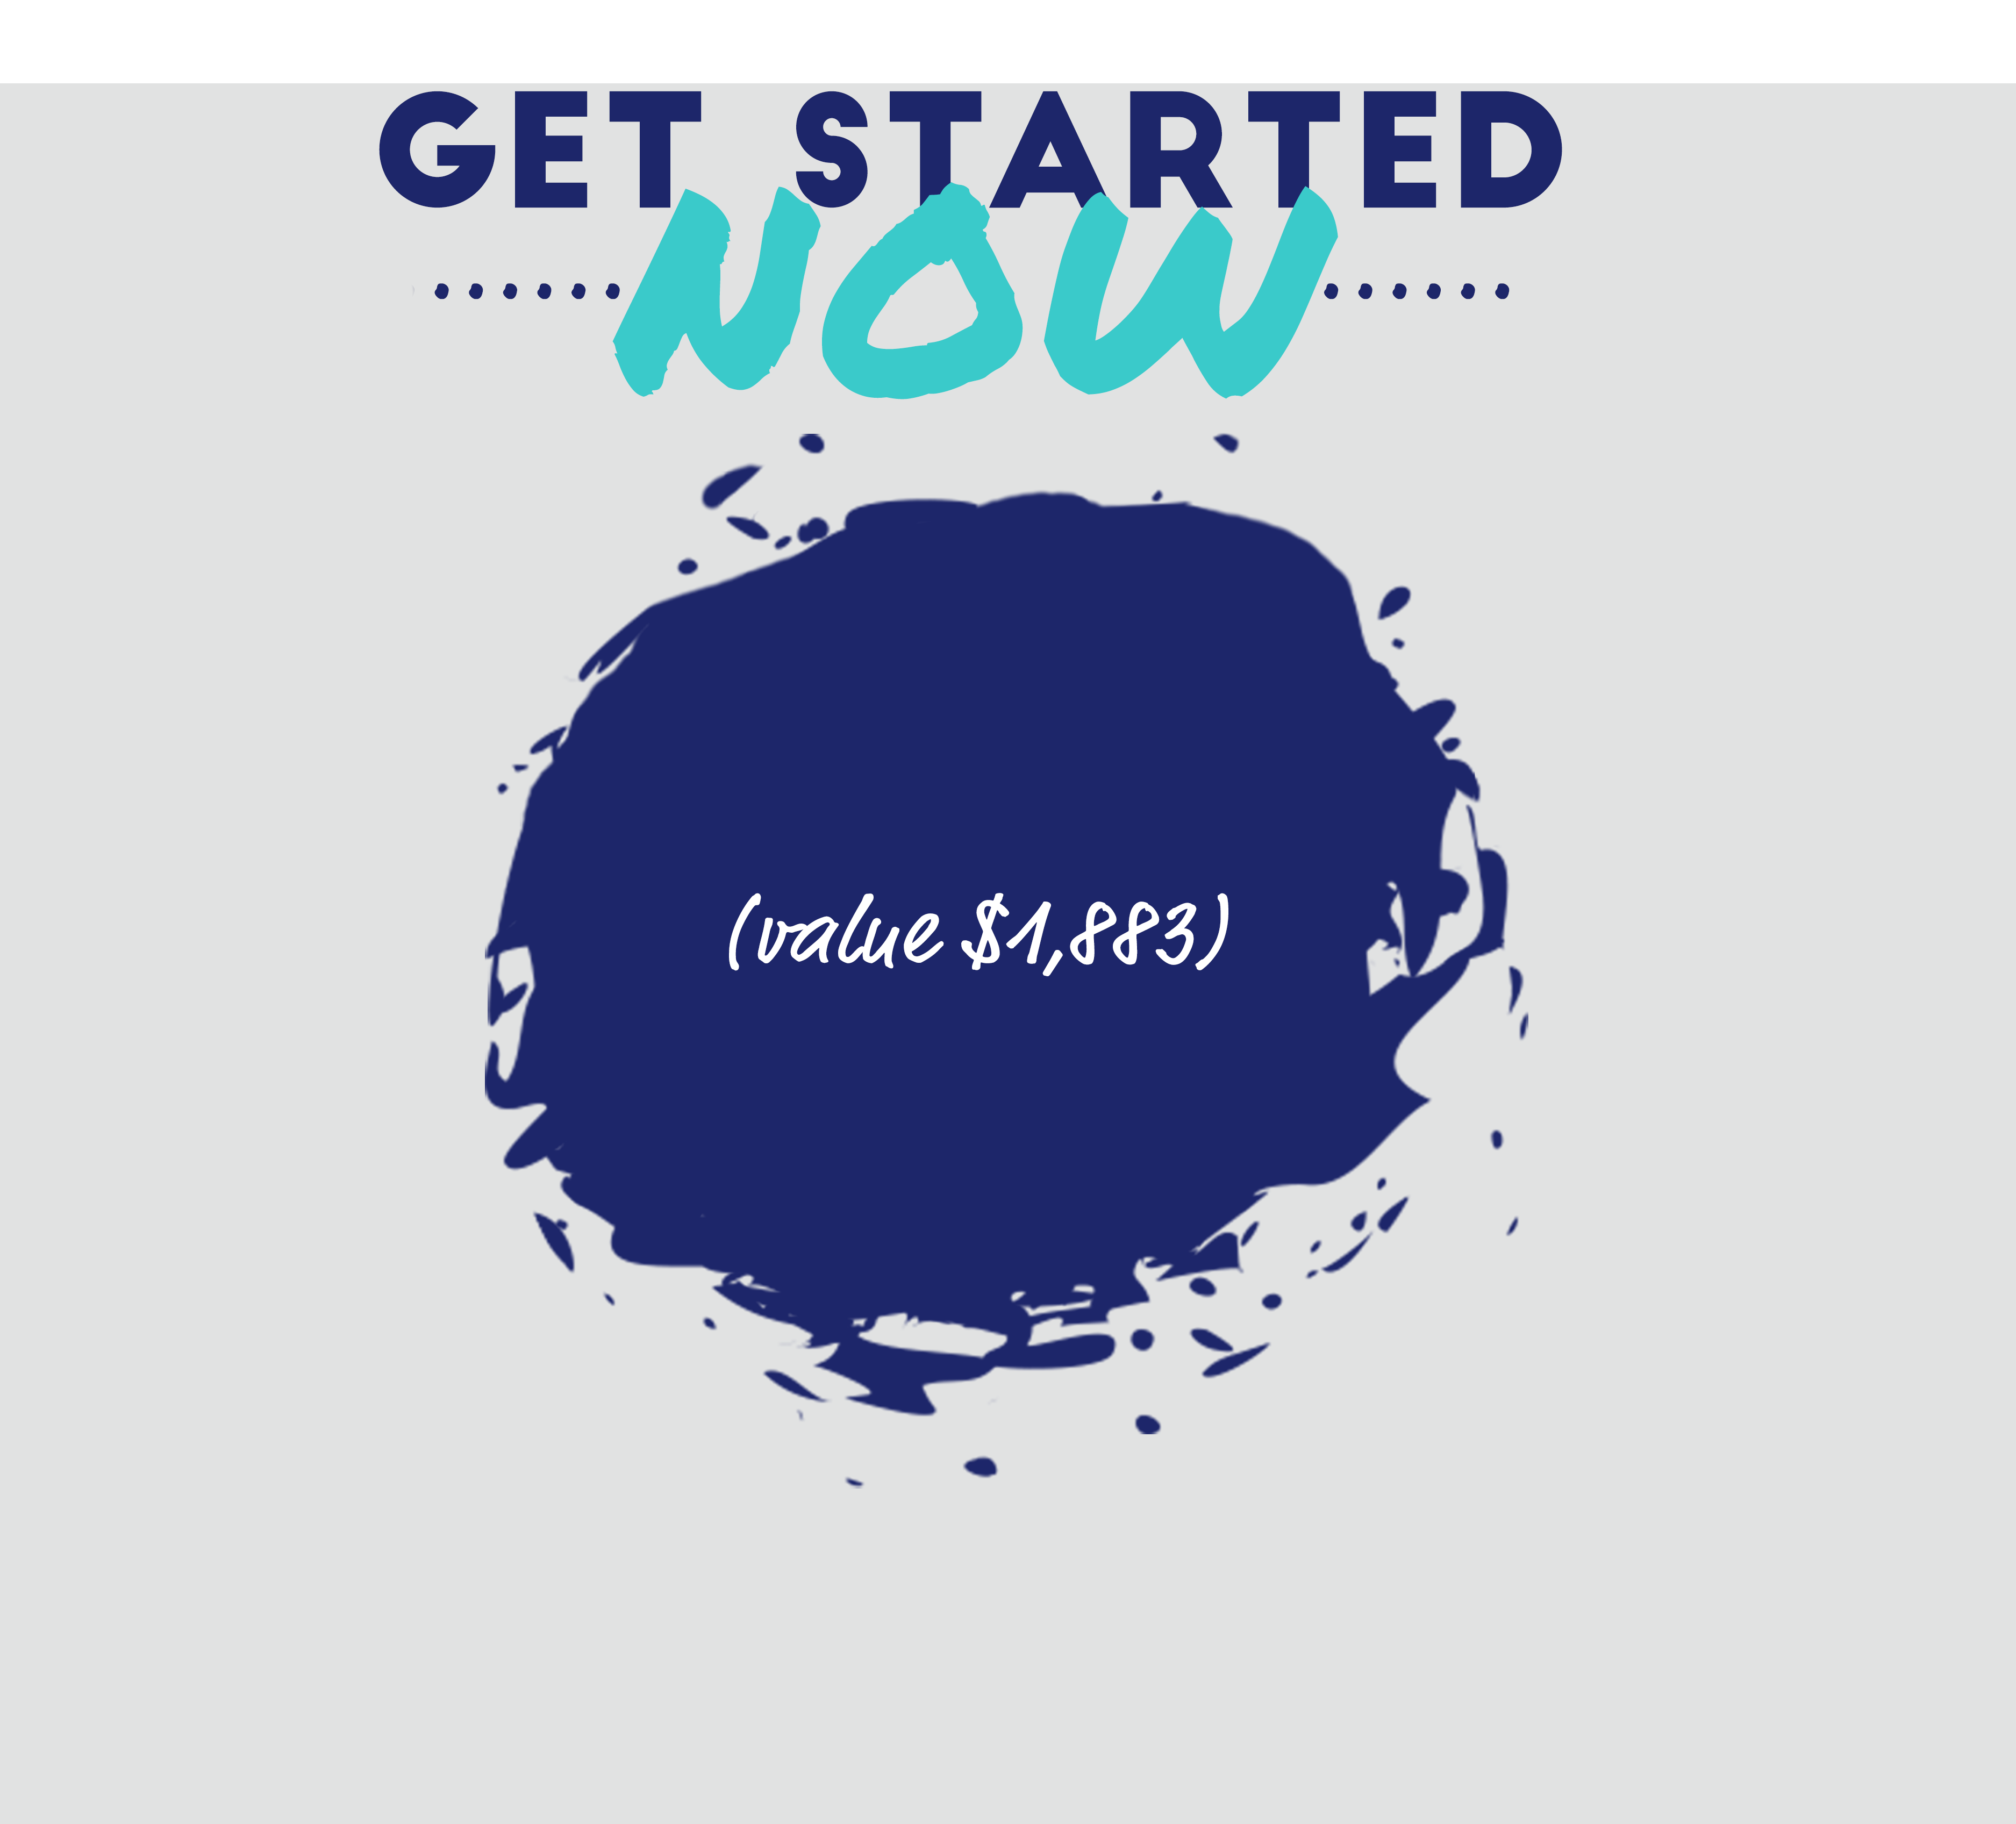 Get Started NOW: (value $1,883)